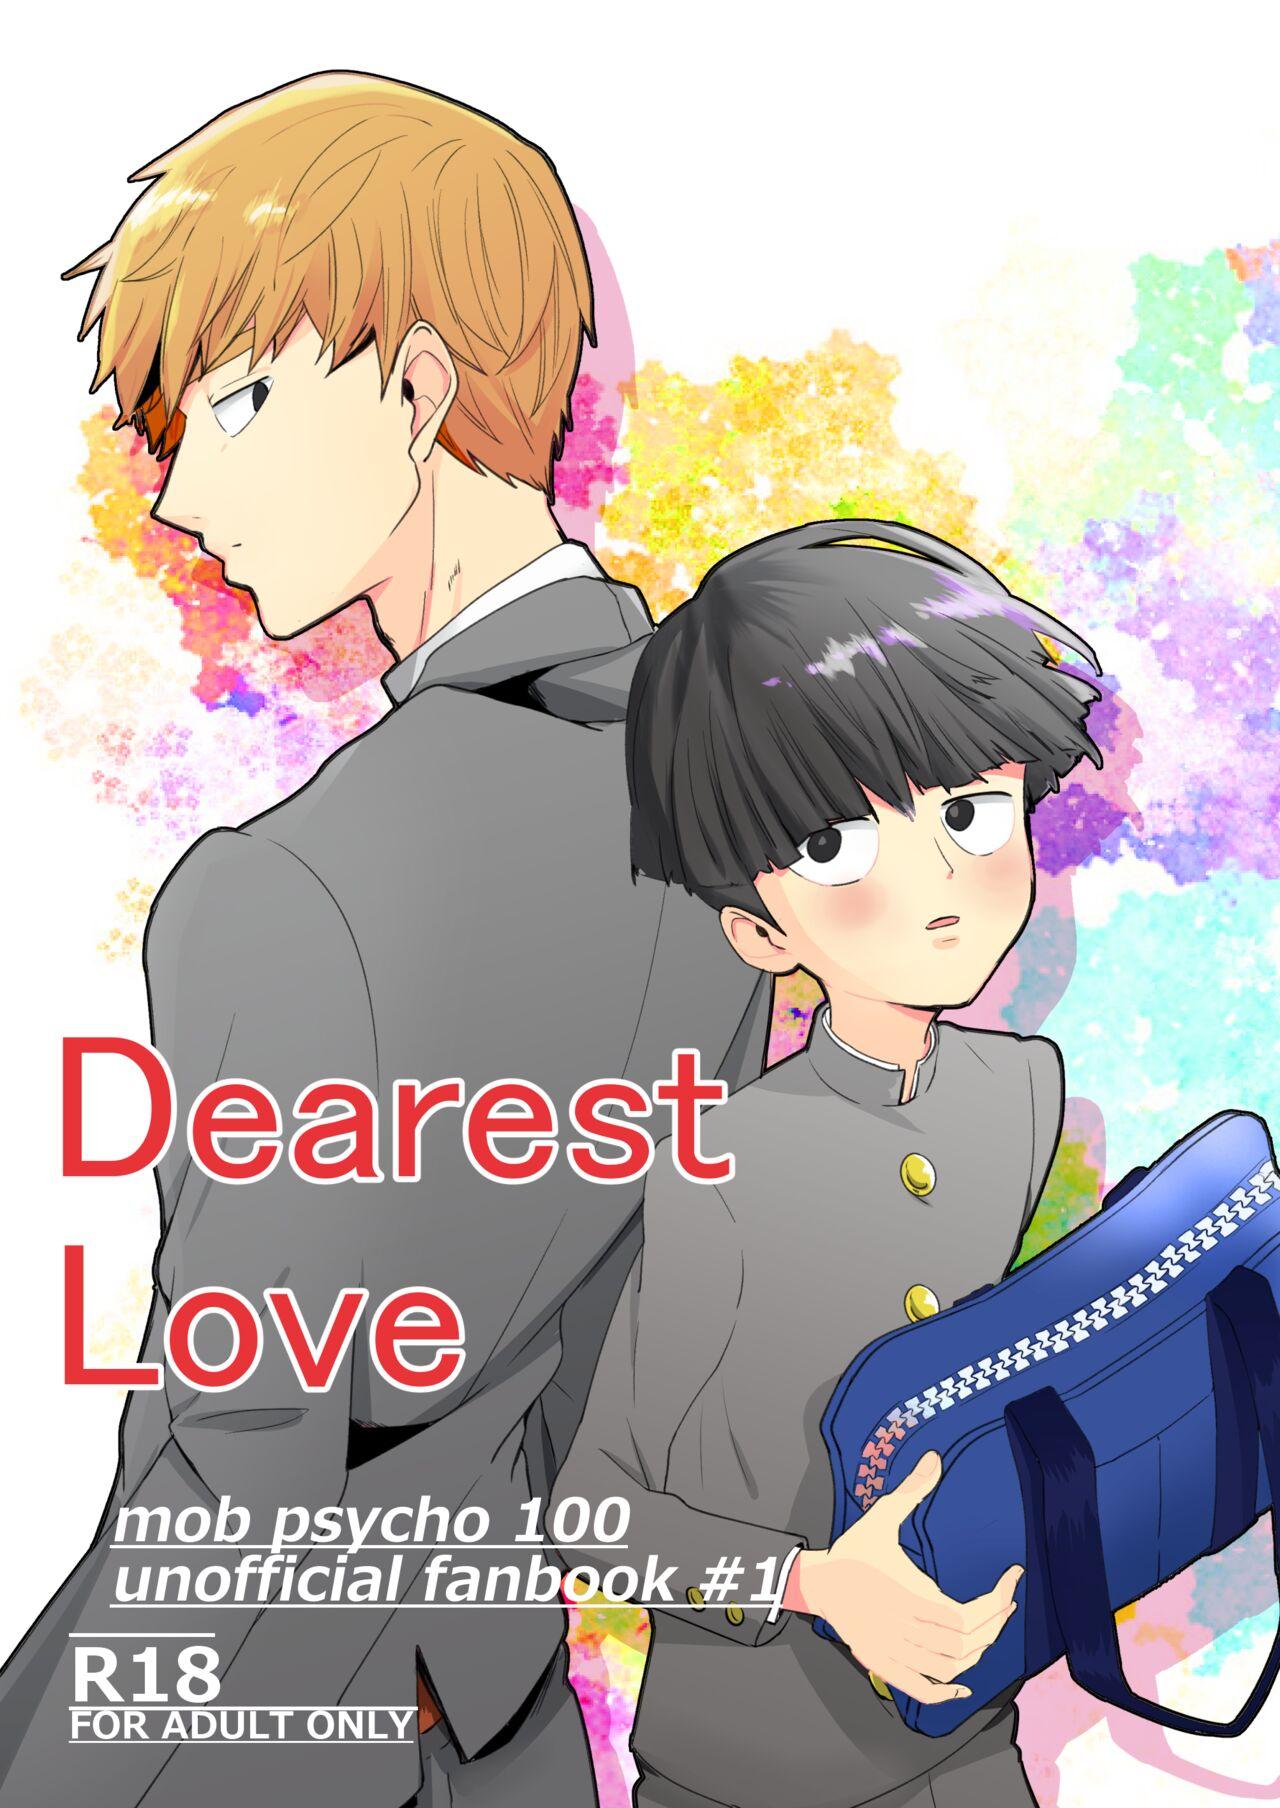 Submissive Dearest love - Mob psycho 100 Peru - Page 1